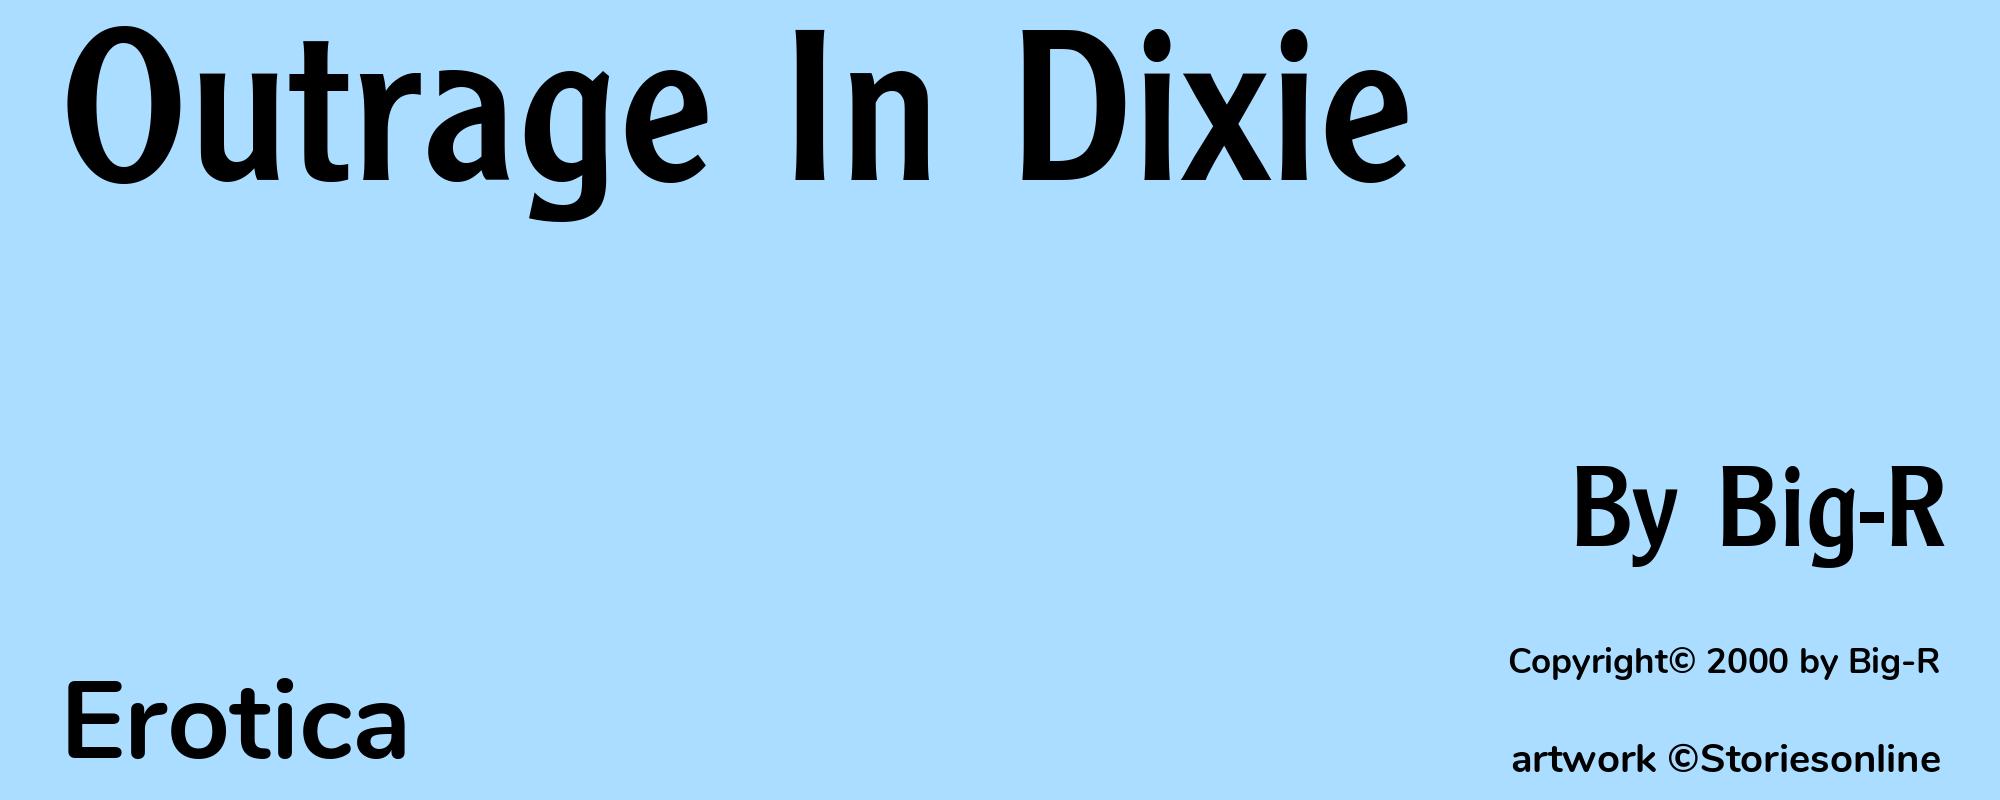 Outrage In Dixie - Cover